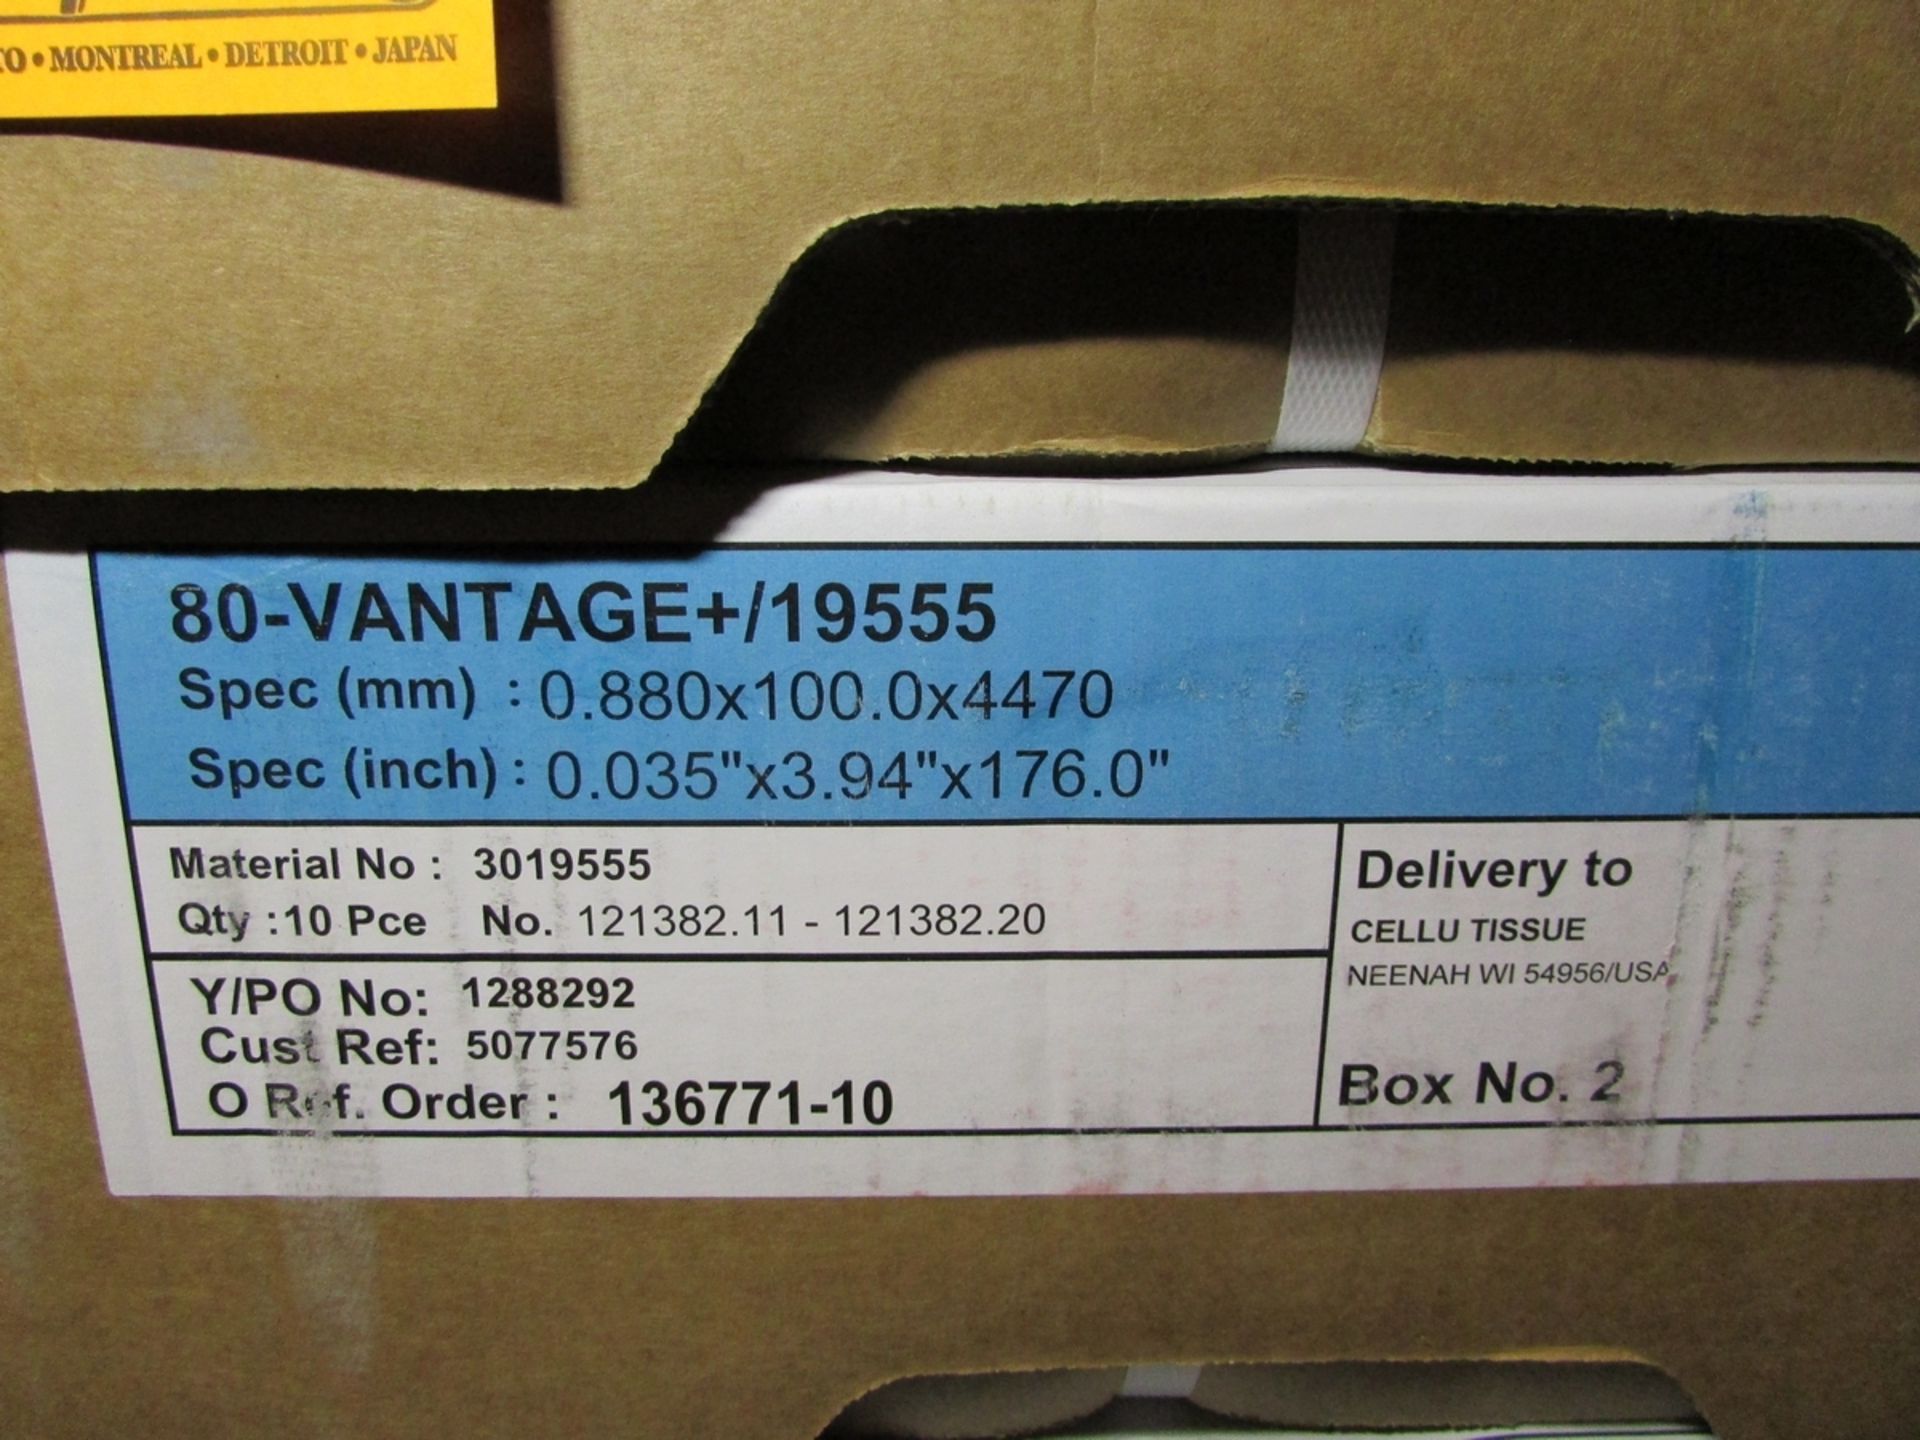 Voith BTG 80-Vantage+/19555 Boxes of 0.035" x 3.94" x 176" Creping Blades - Image 2 of 2